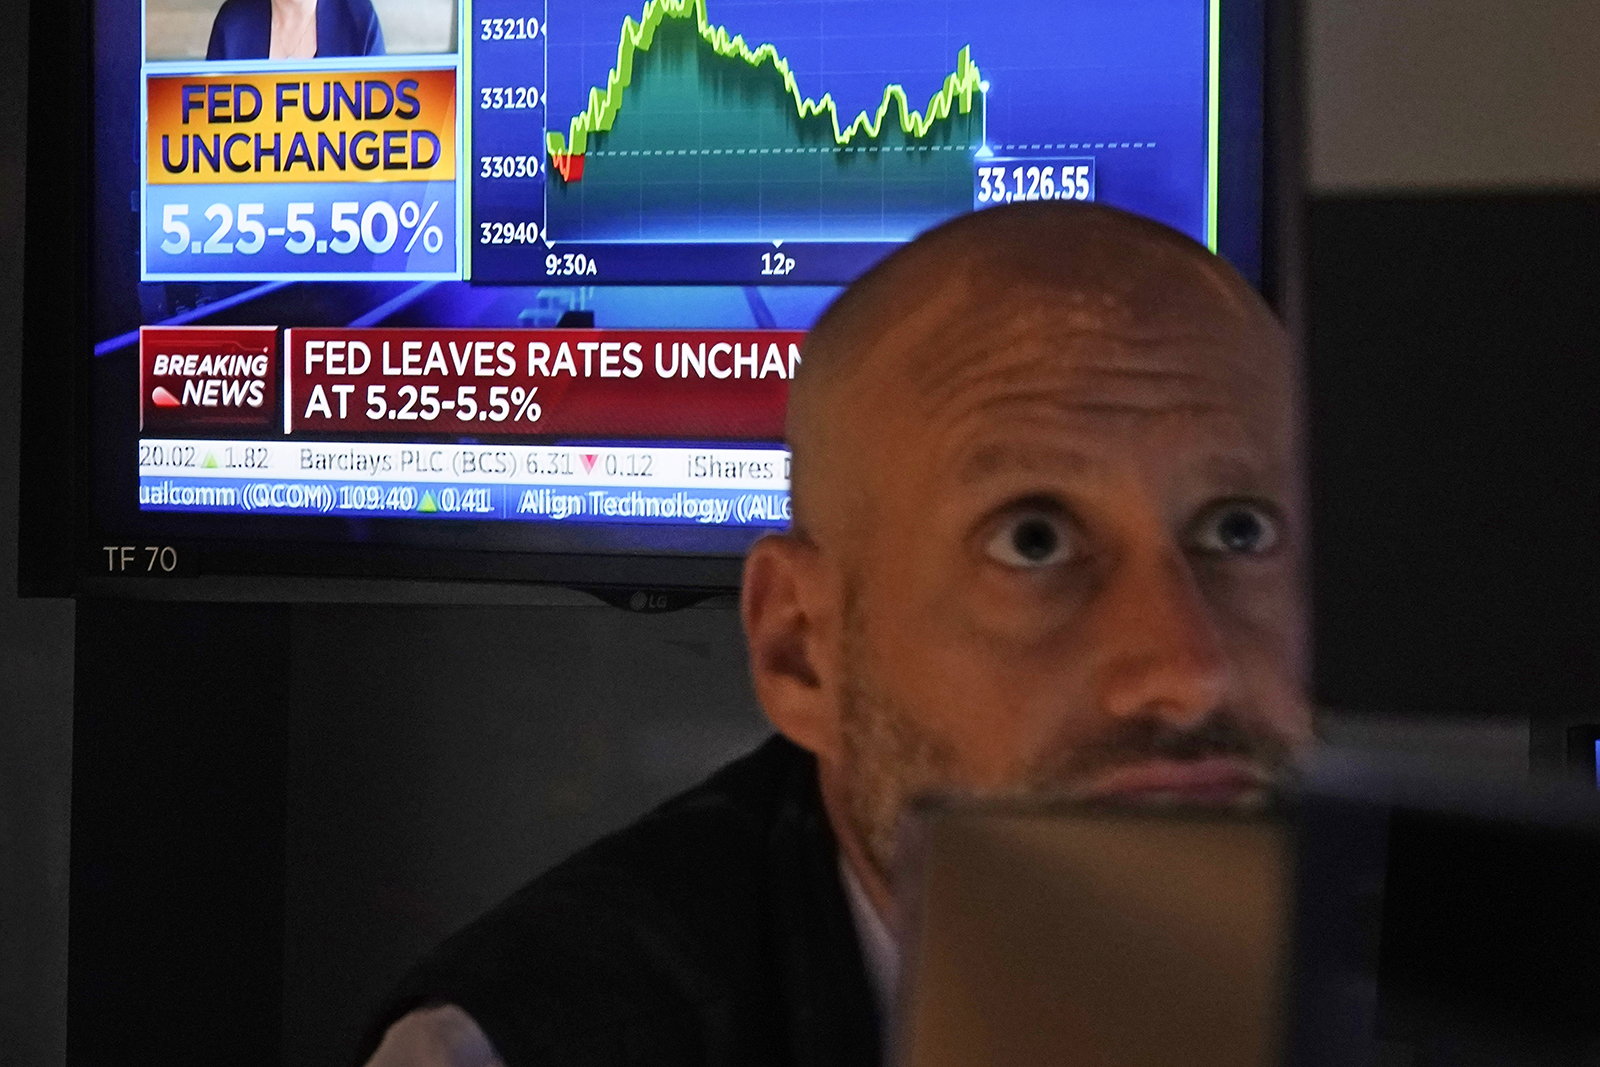 A television screen shows the rate decision of the Federal Reserve a trader works at his post on the floor of the New York Stock Exchange, Wednesday, Nov. 1.